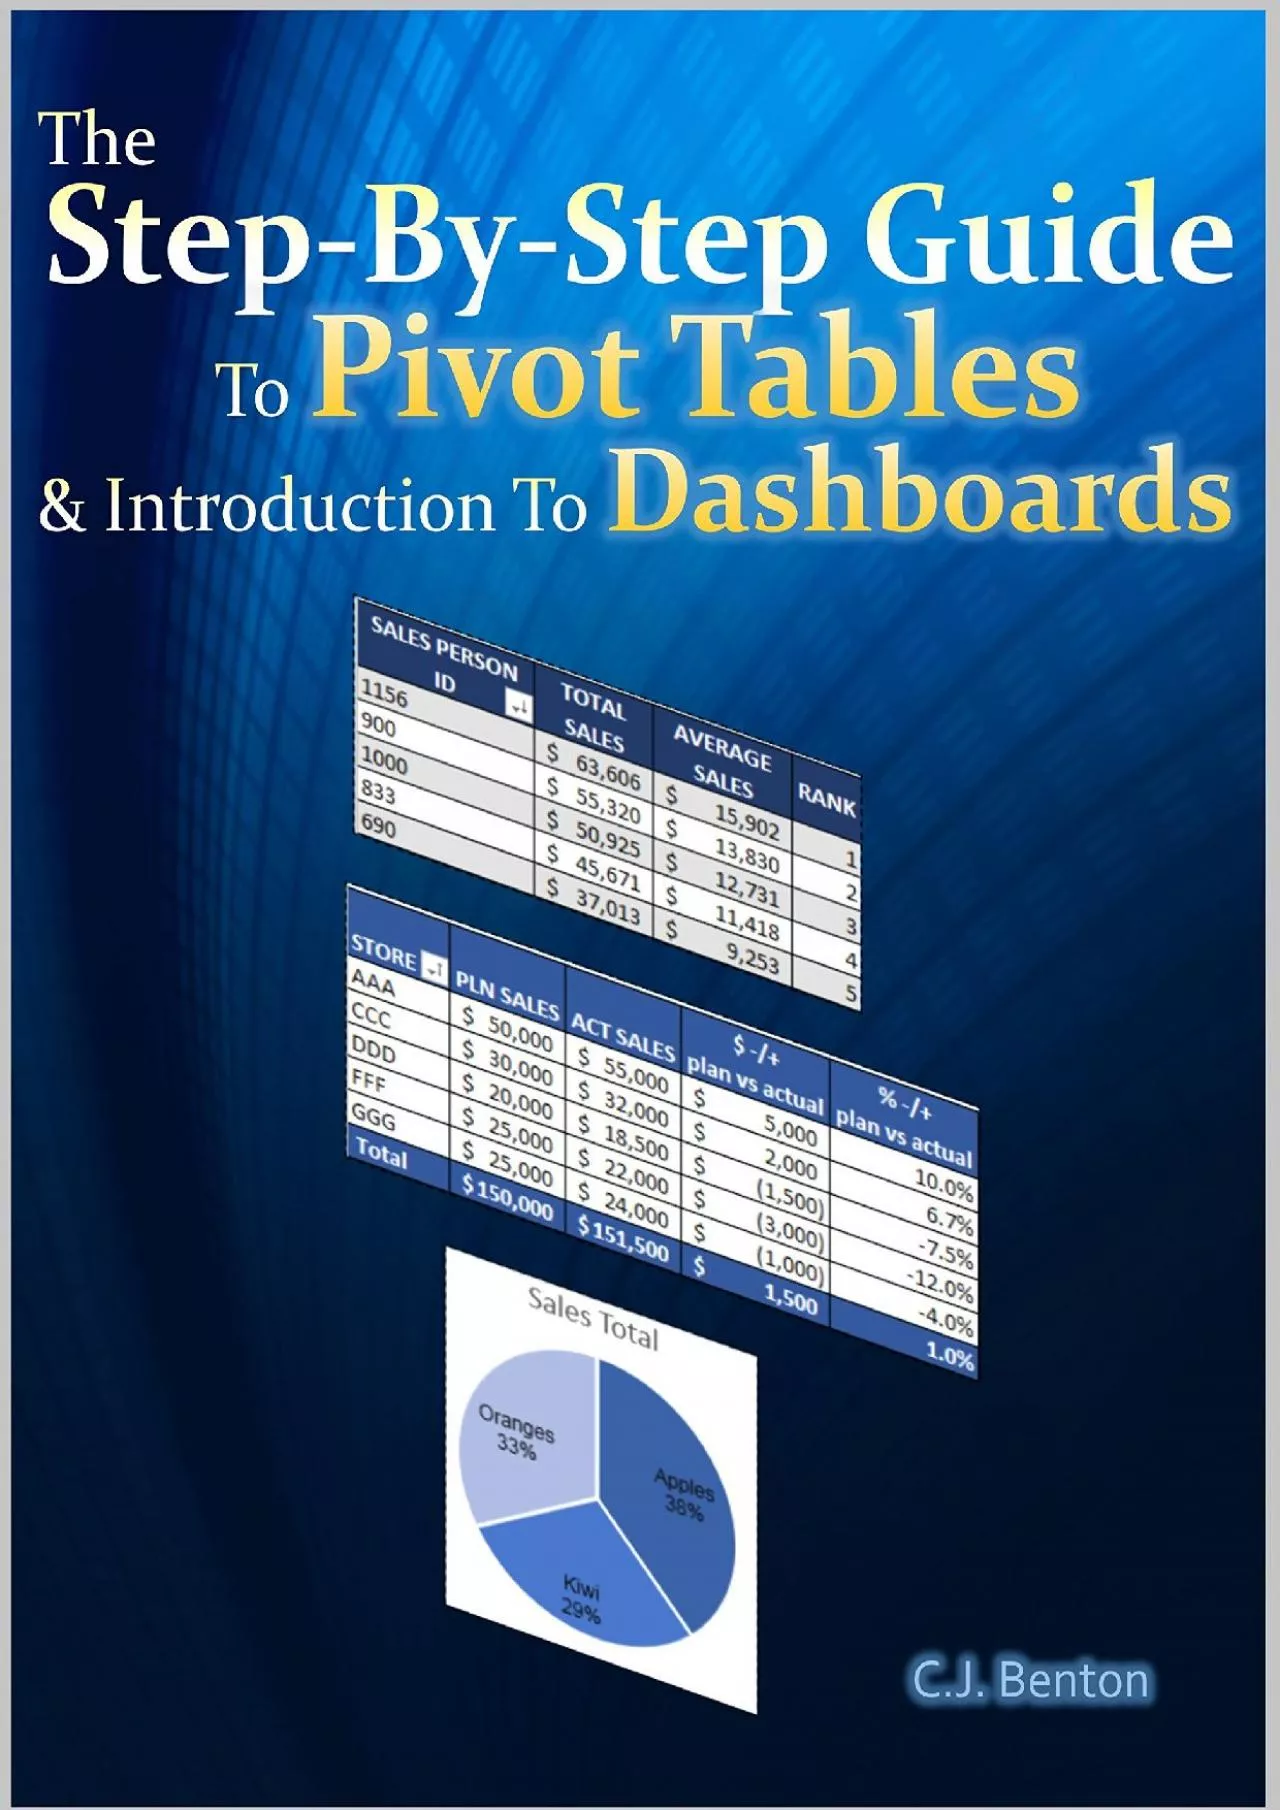 (EBOOK)-The Step-By-Step Guide To Pivot Tables  Introduction To Dashboards (The Microsoft